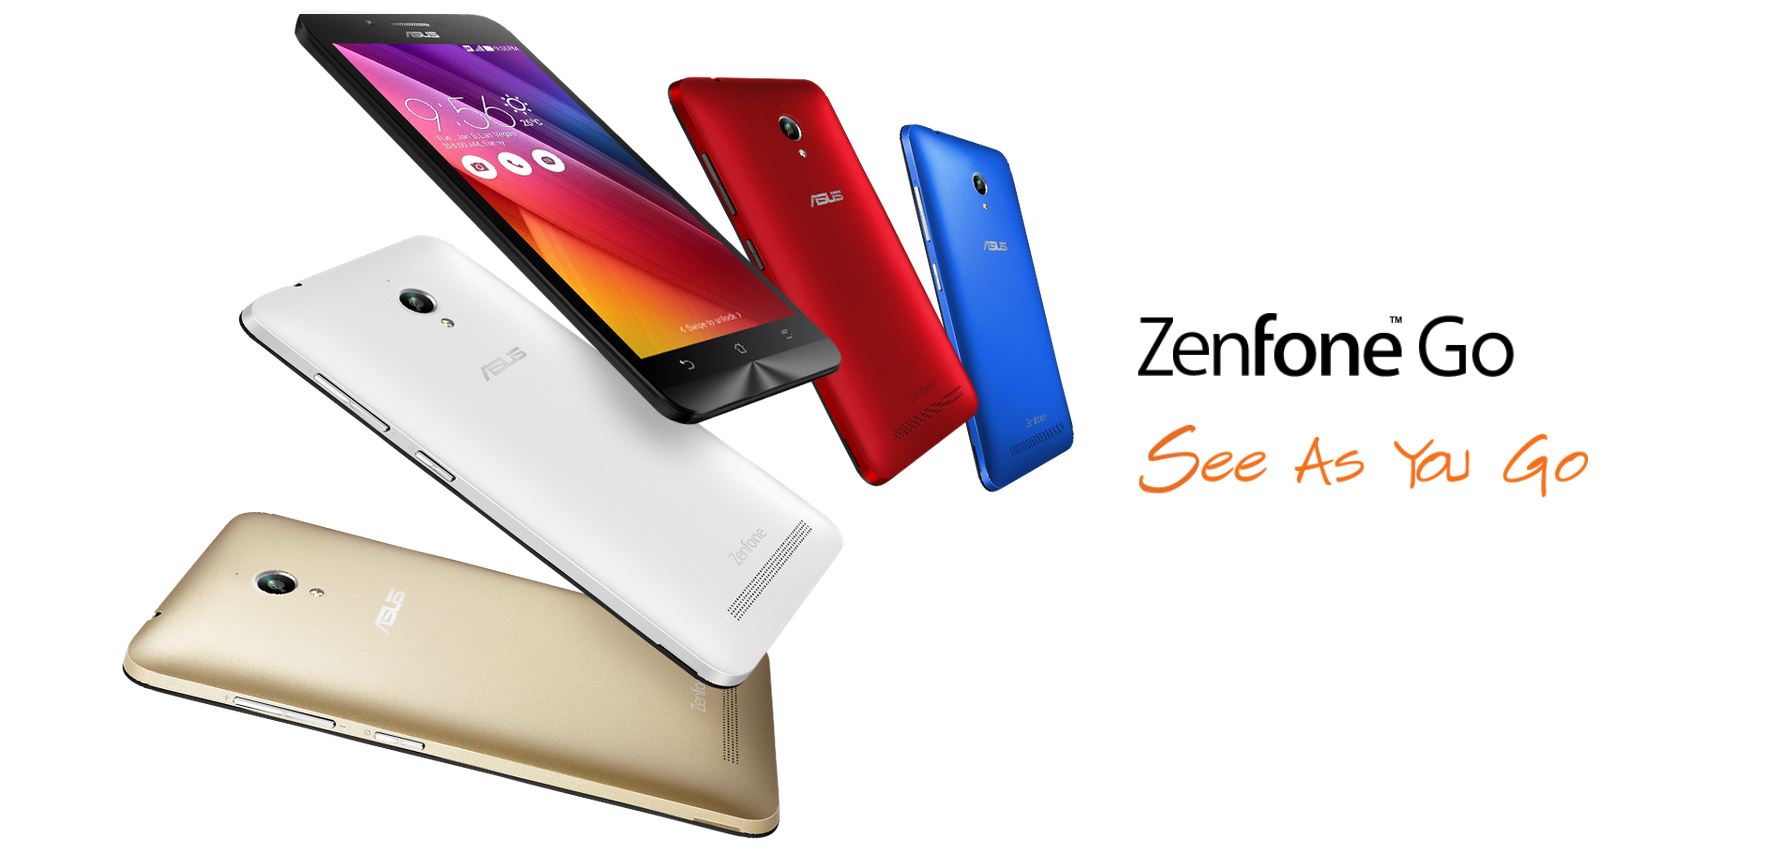 ASUS Zenfone GO is now available in ASUS MY store 26